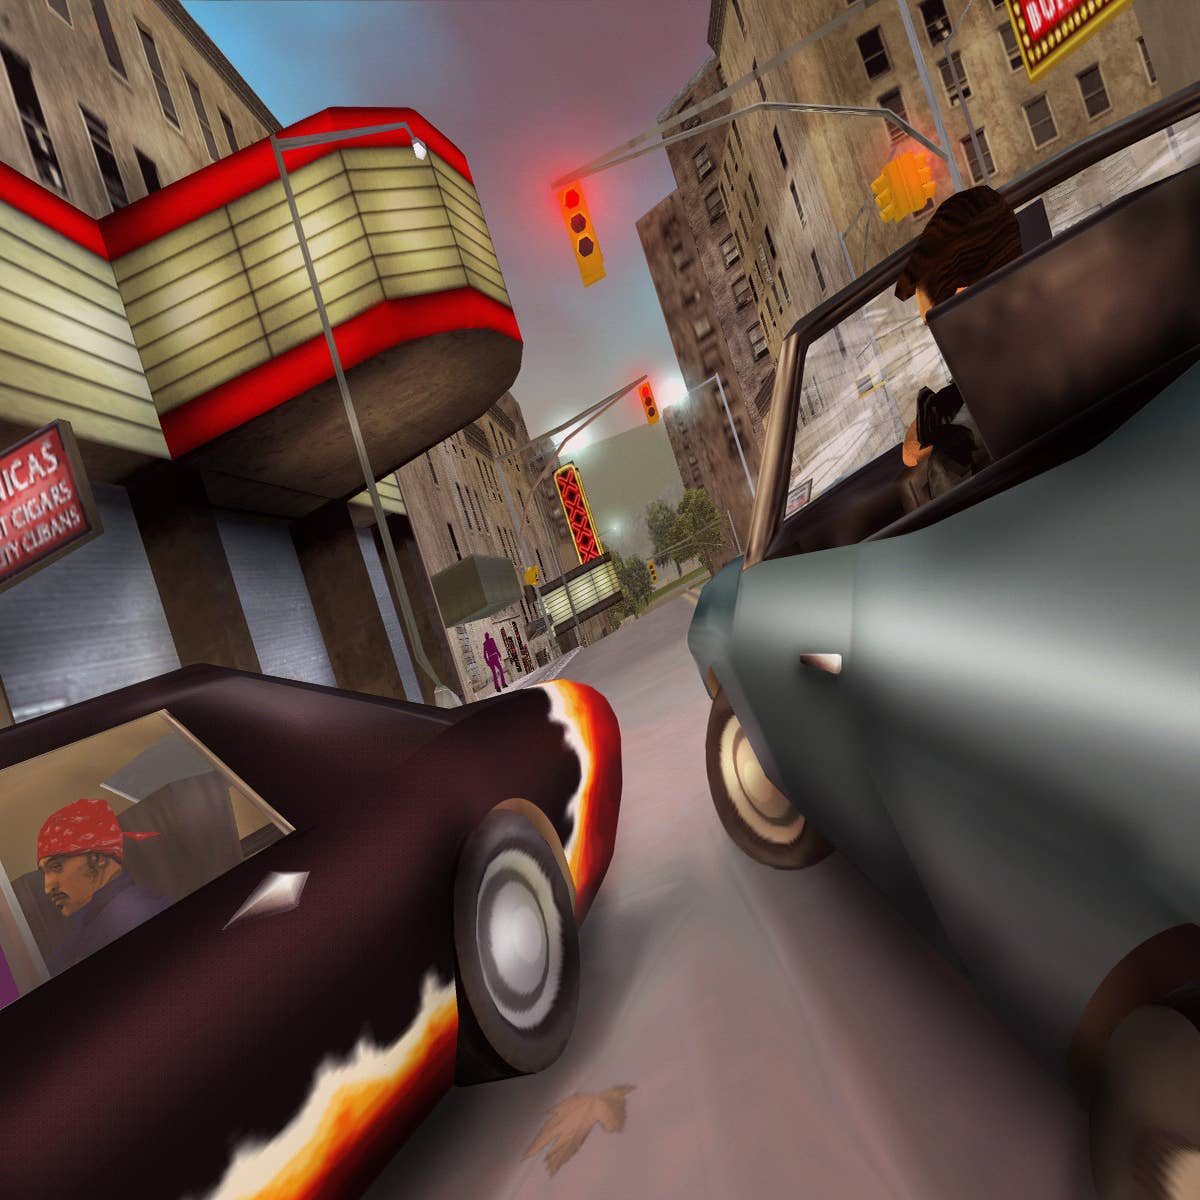 How Rockstar Games' 'Grand Theft Auto III' Created Years of Open